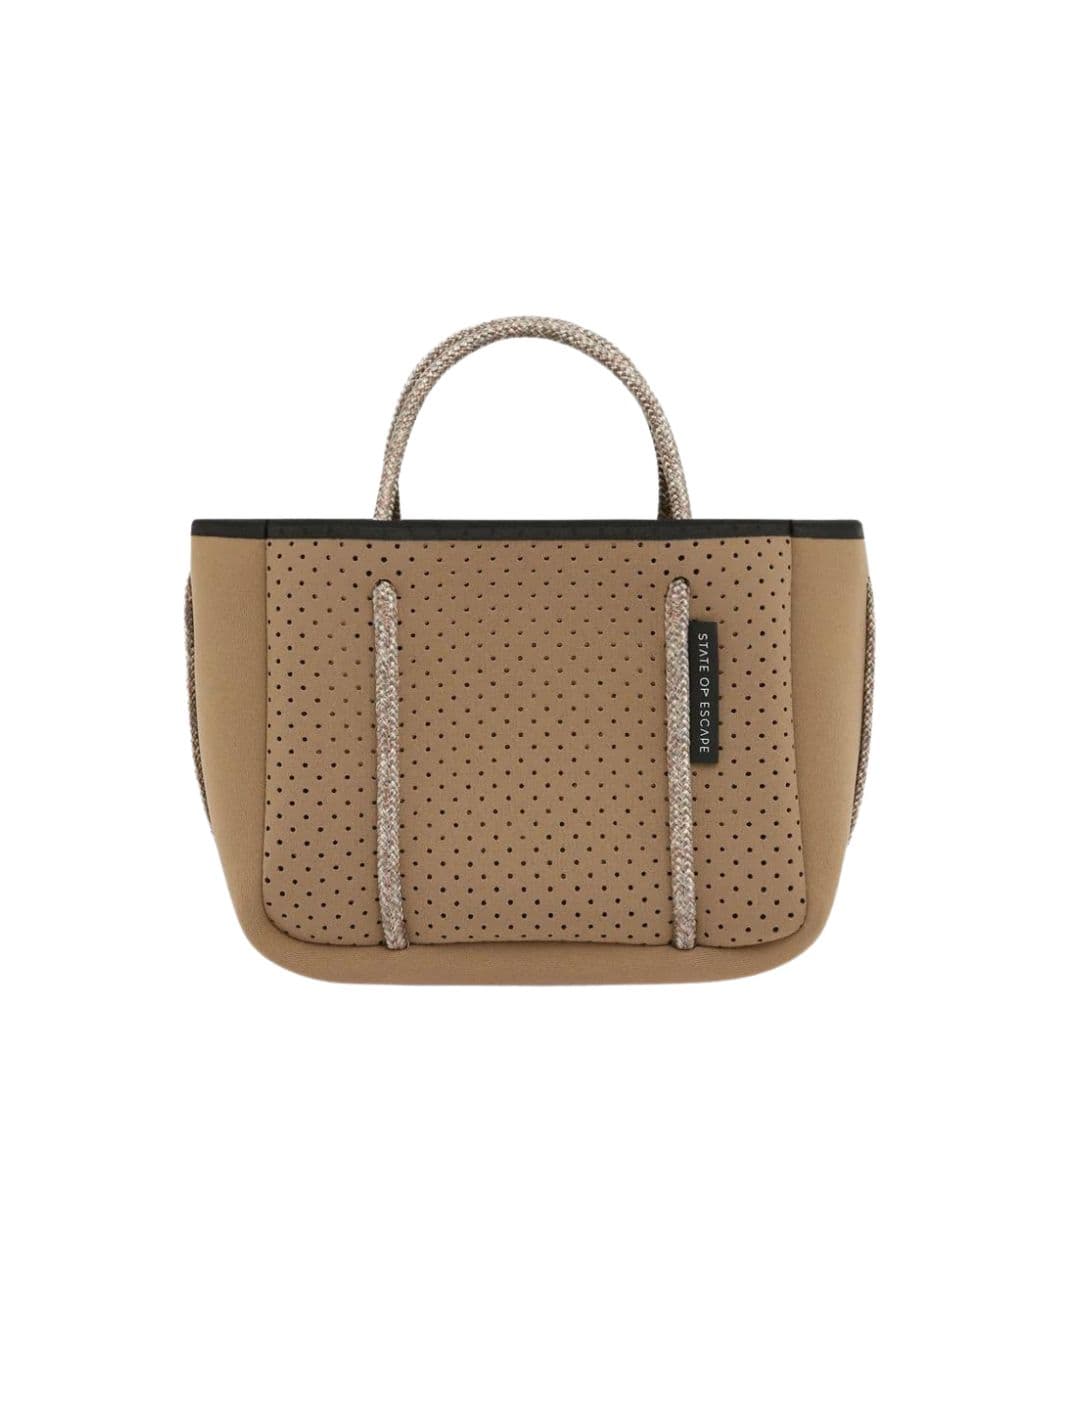 State of Escape Bags Tote Bag | Micro Caramel